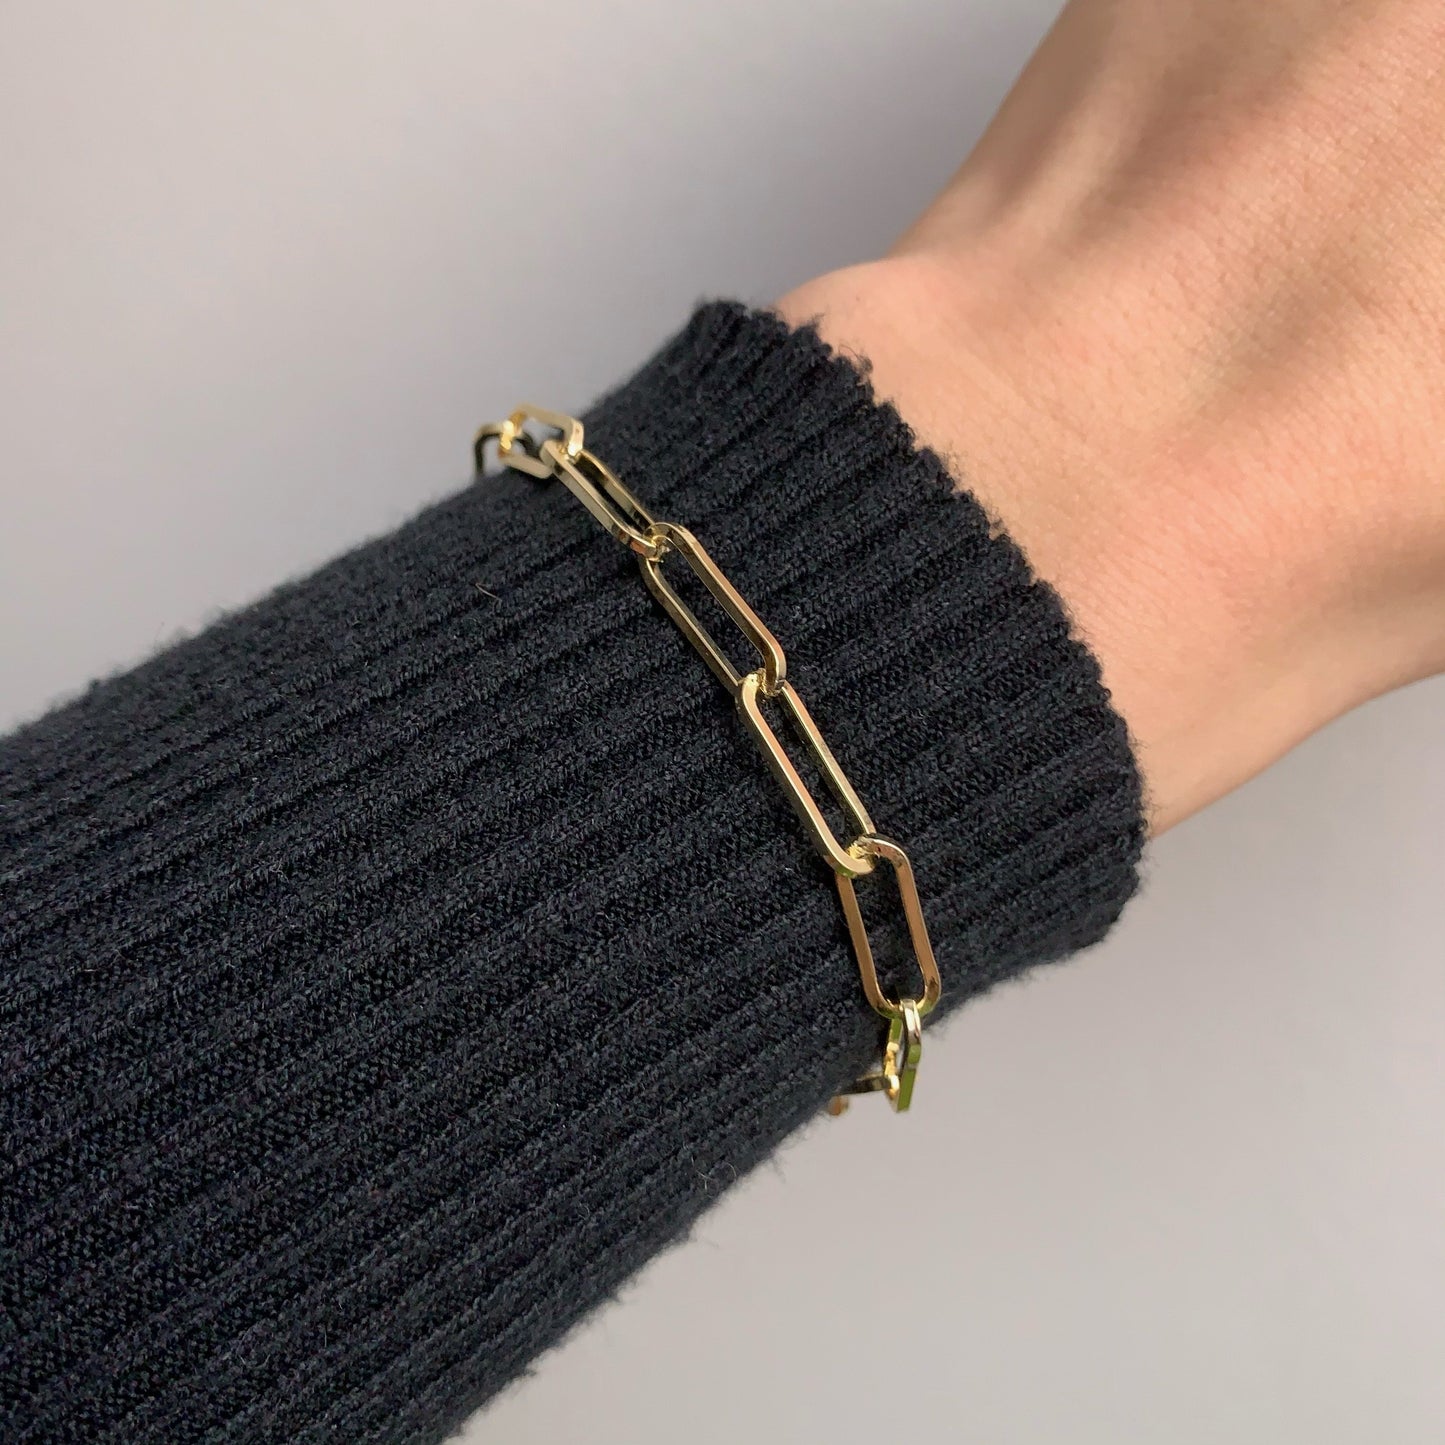 Connected Bracelet - Veooy